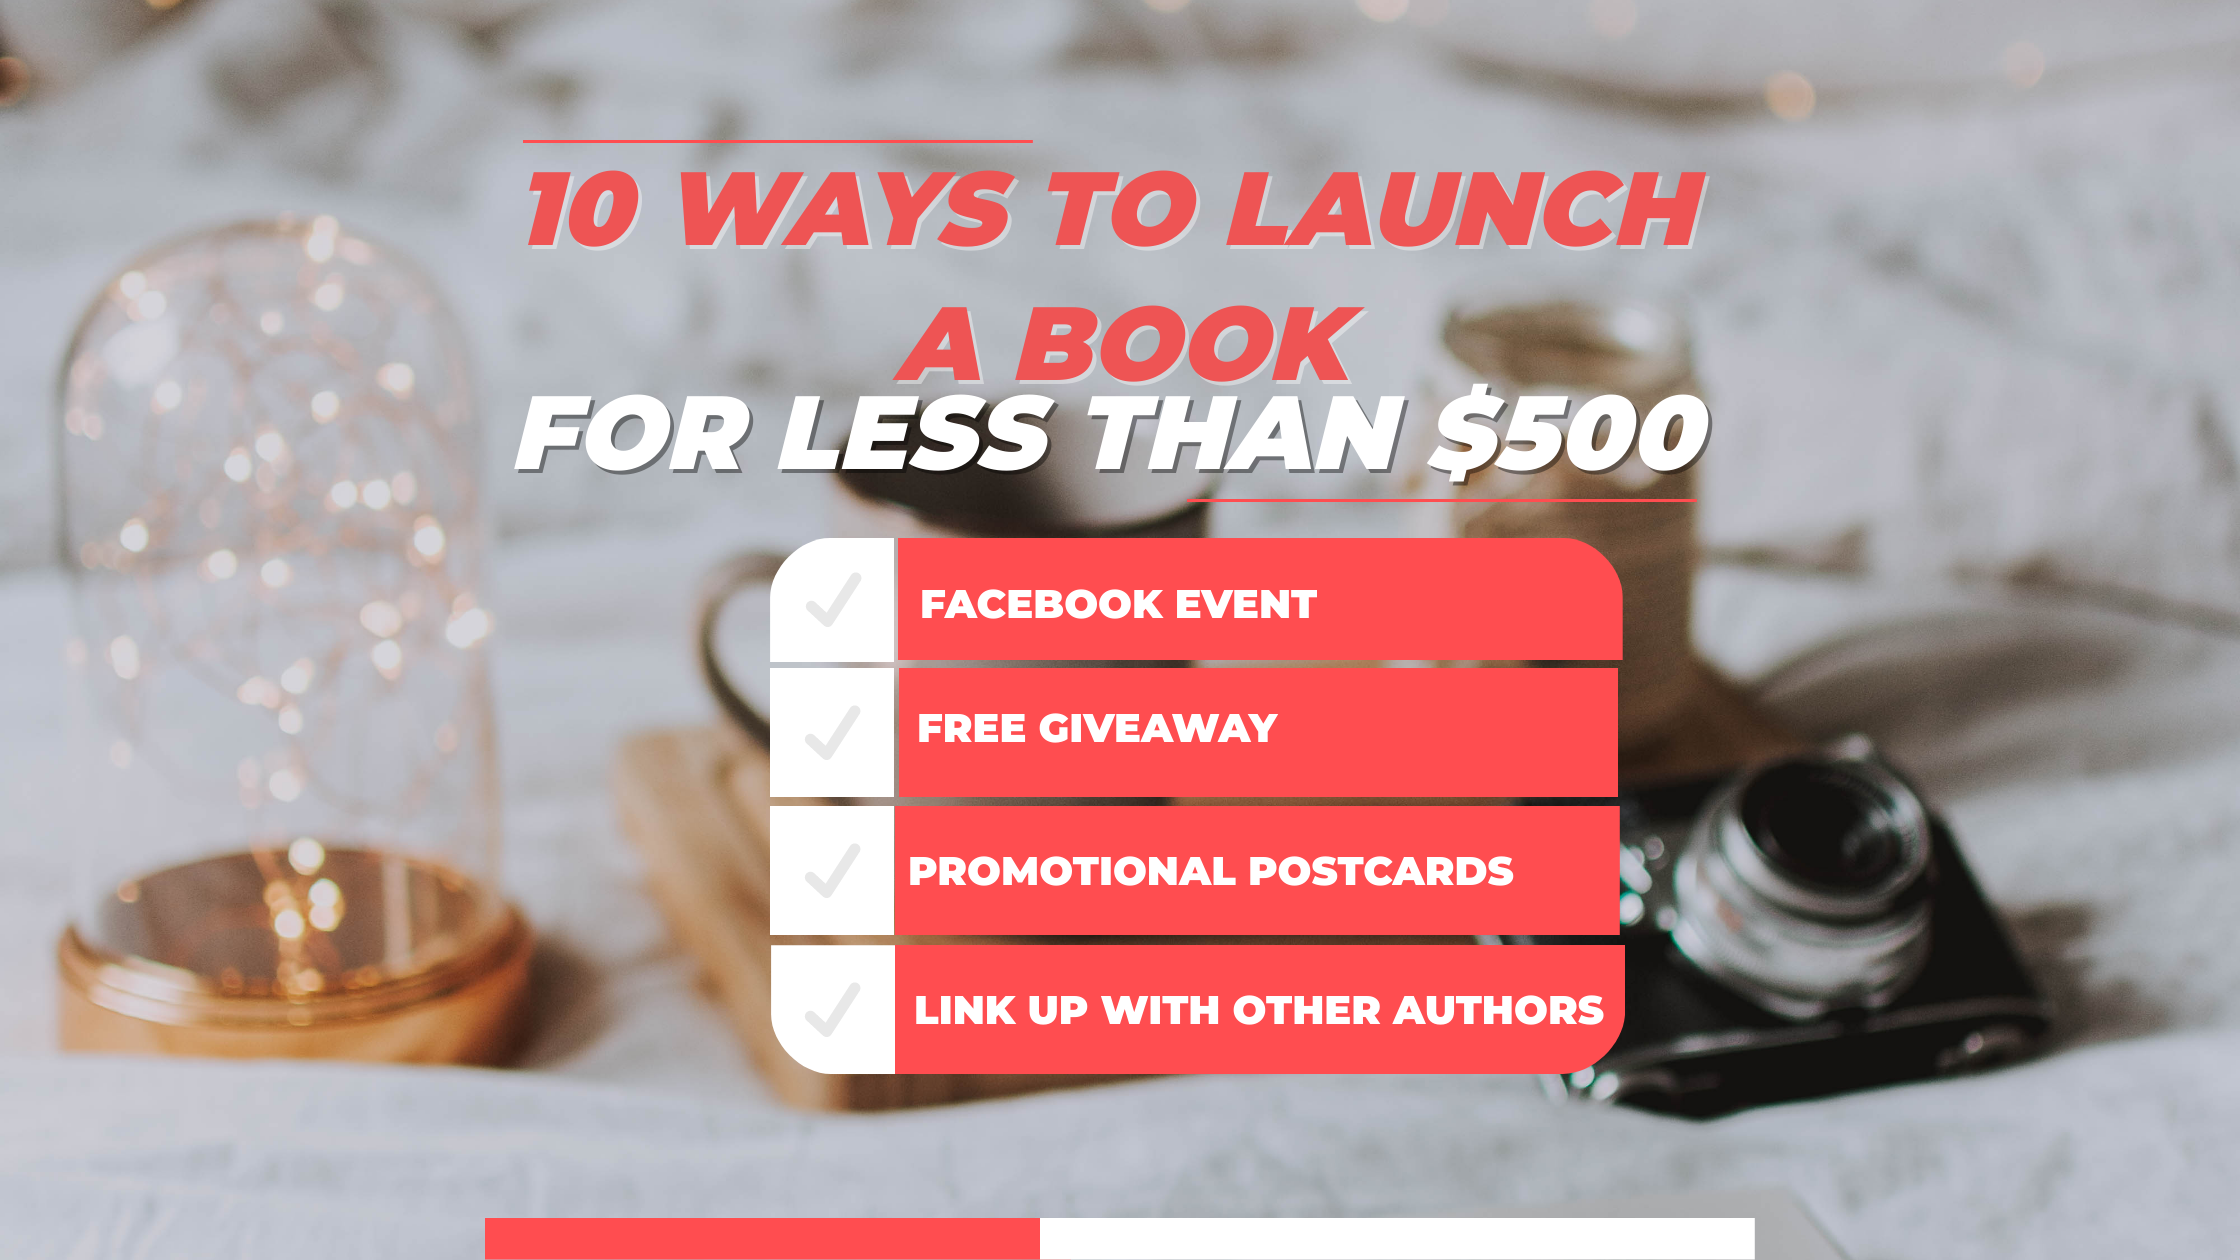 10 Ways to Launch a Book for Less Than $500